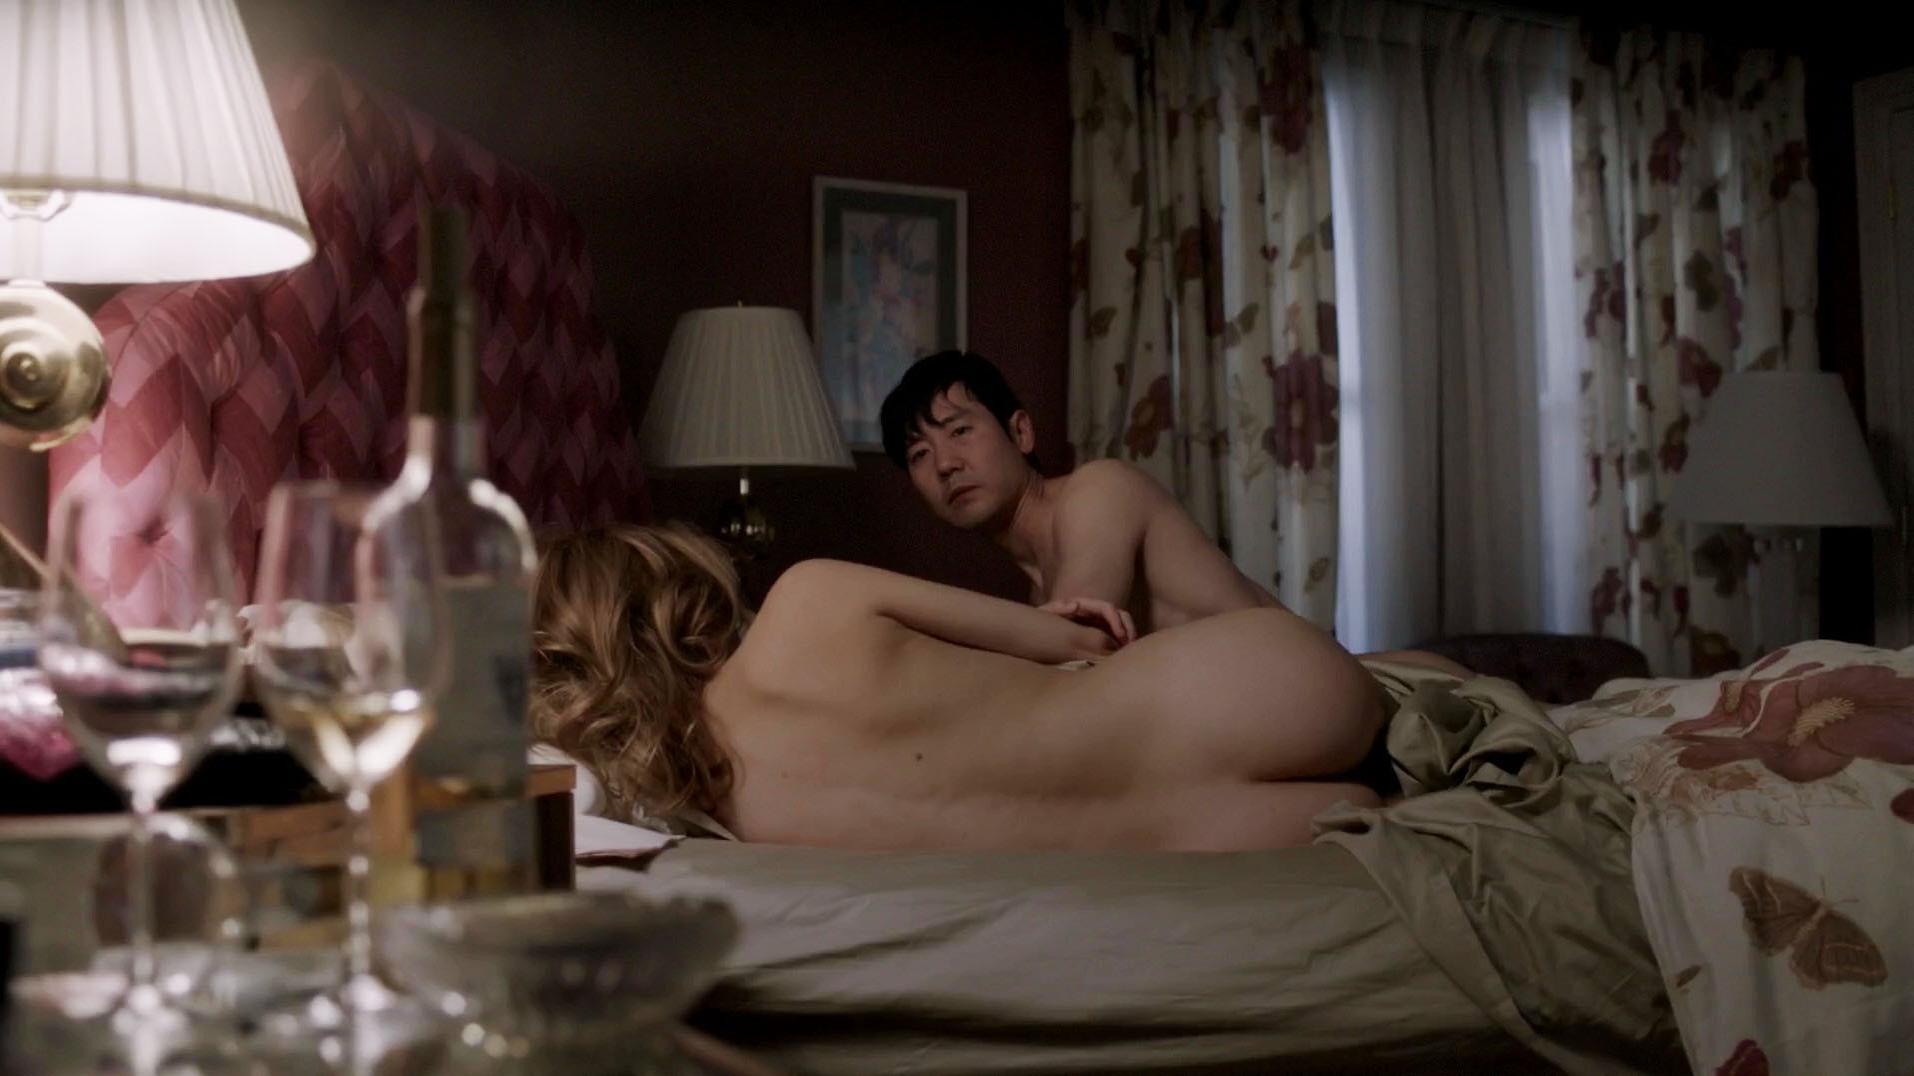 Keri Russell nude - The Americans s04e09 (2016)